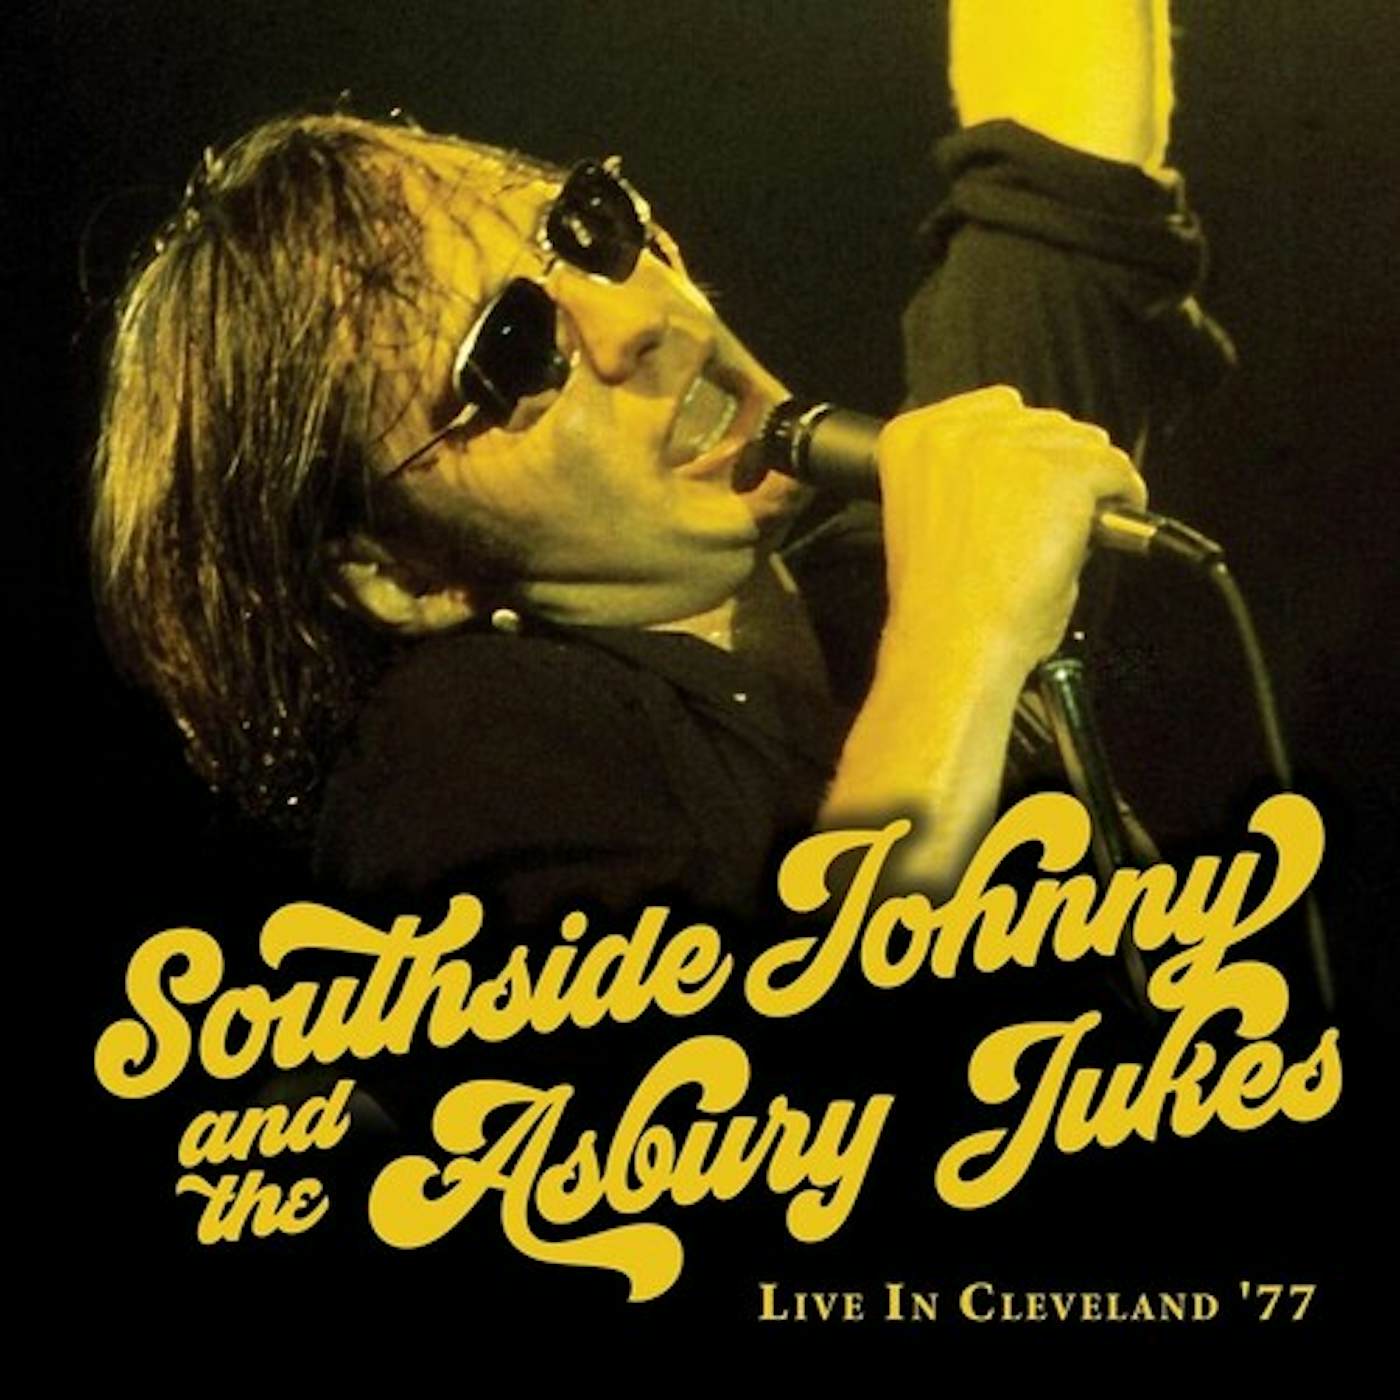 Southside Johnny And The Asbury Jukes Live in Cleveland '77 Vinyl Record